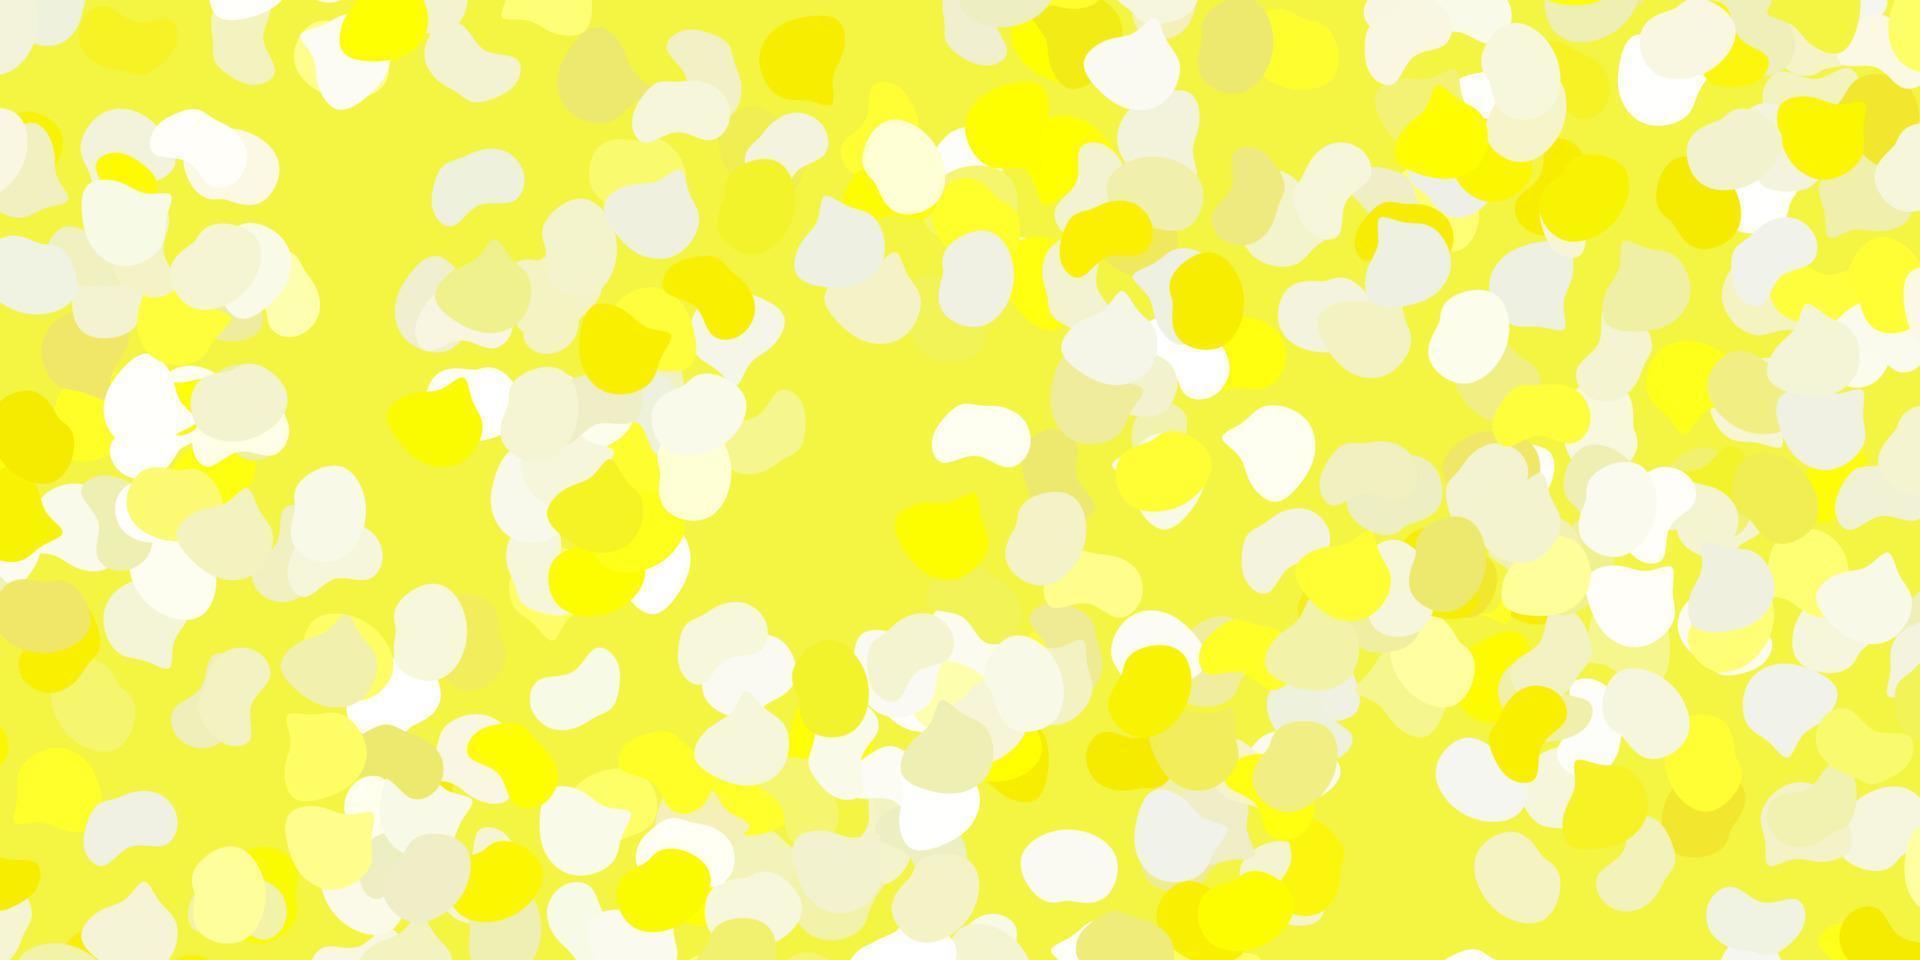 Light yellow vector pattern with abstract shapes